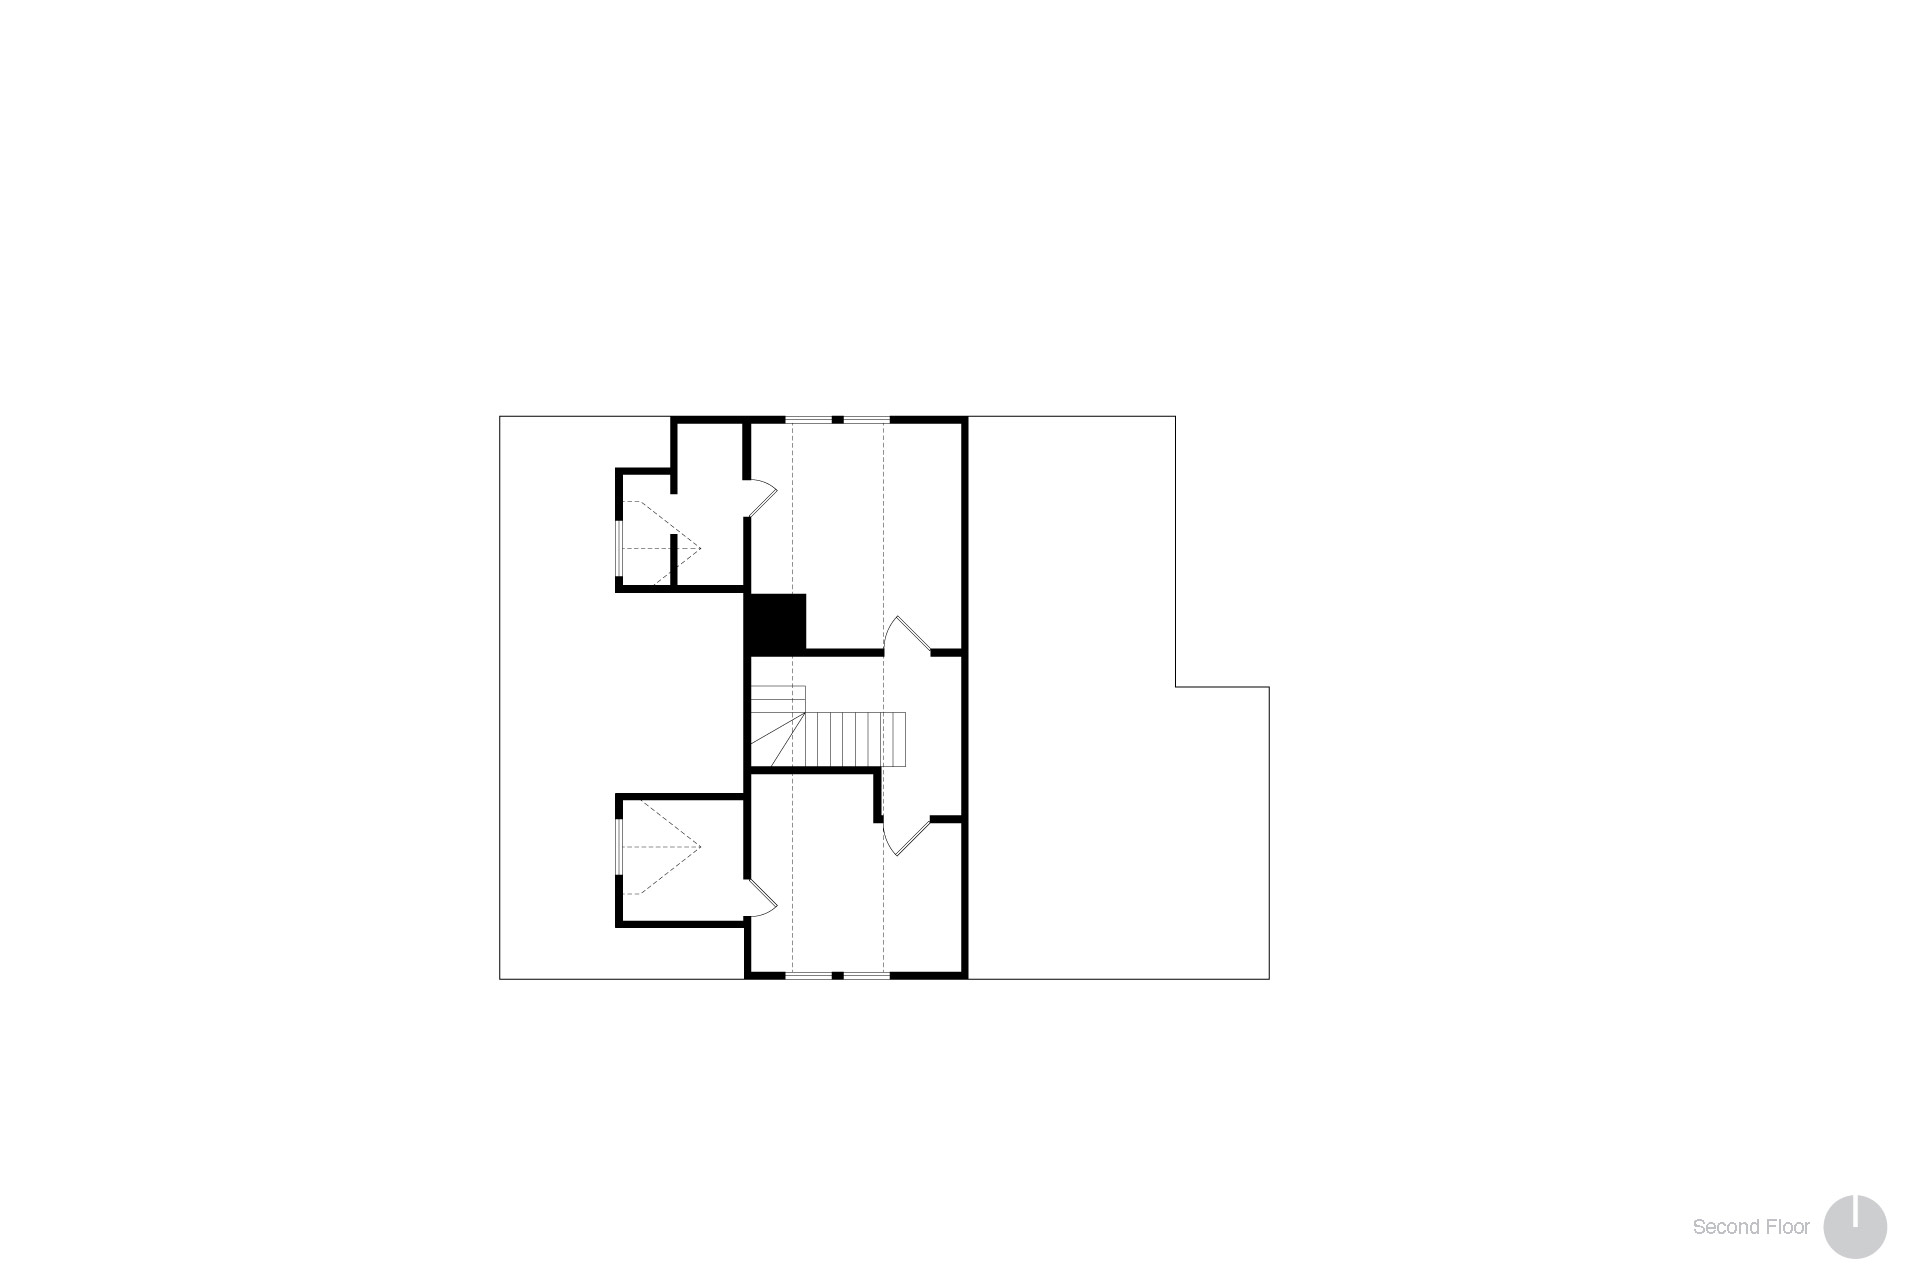 This is a plan drawing of the second floor of the Alameda Craftsman before being renovated.